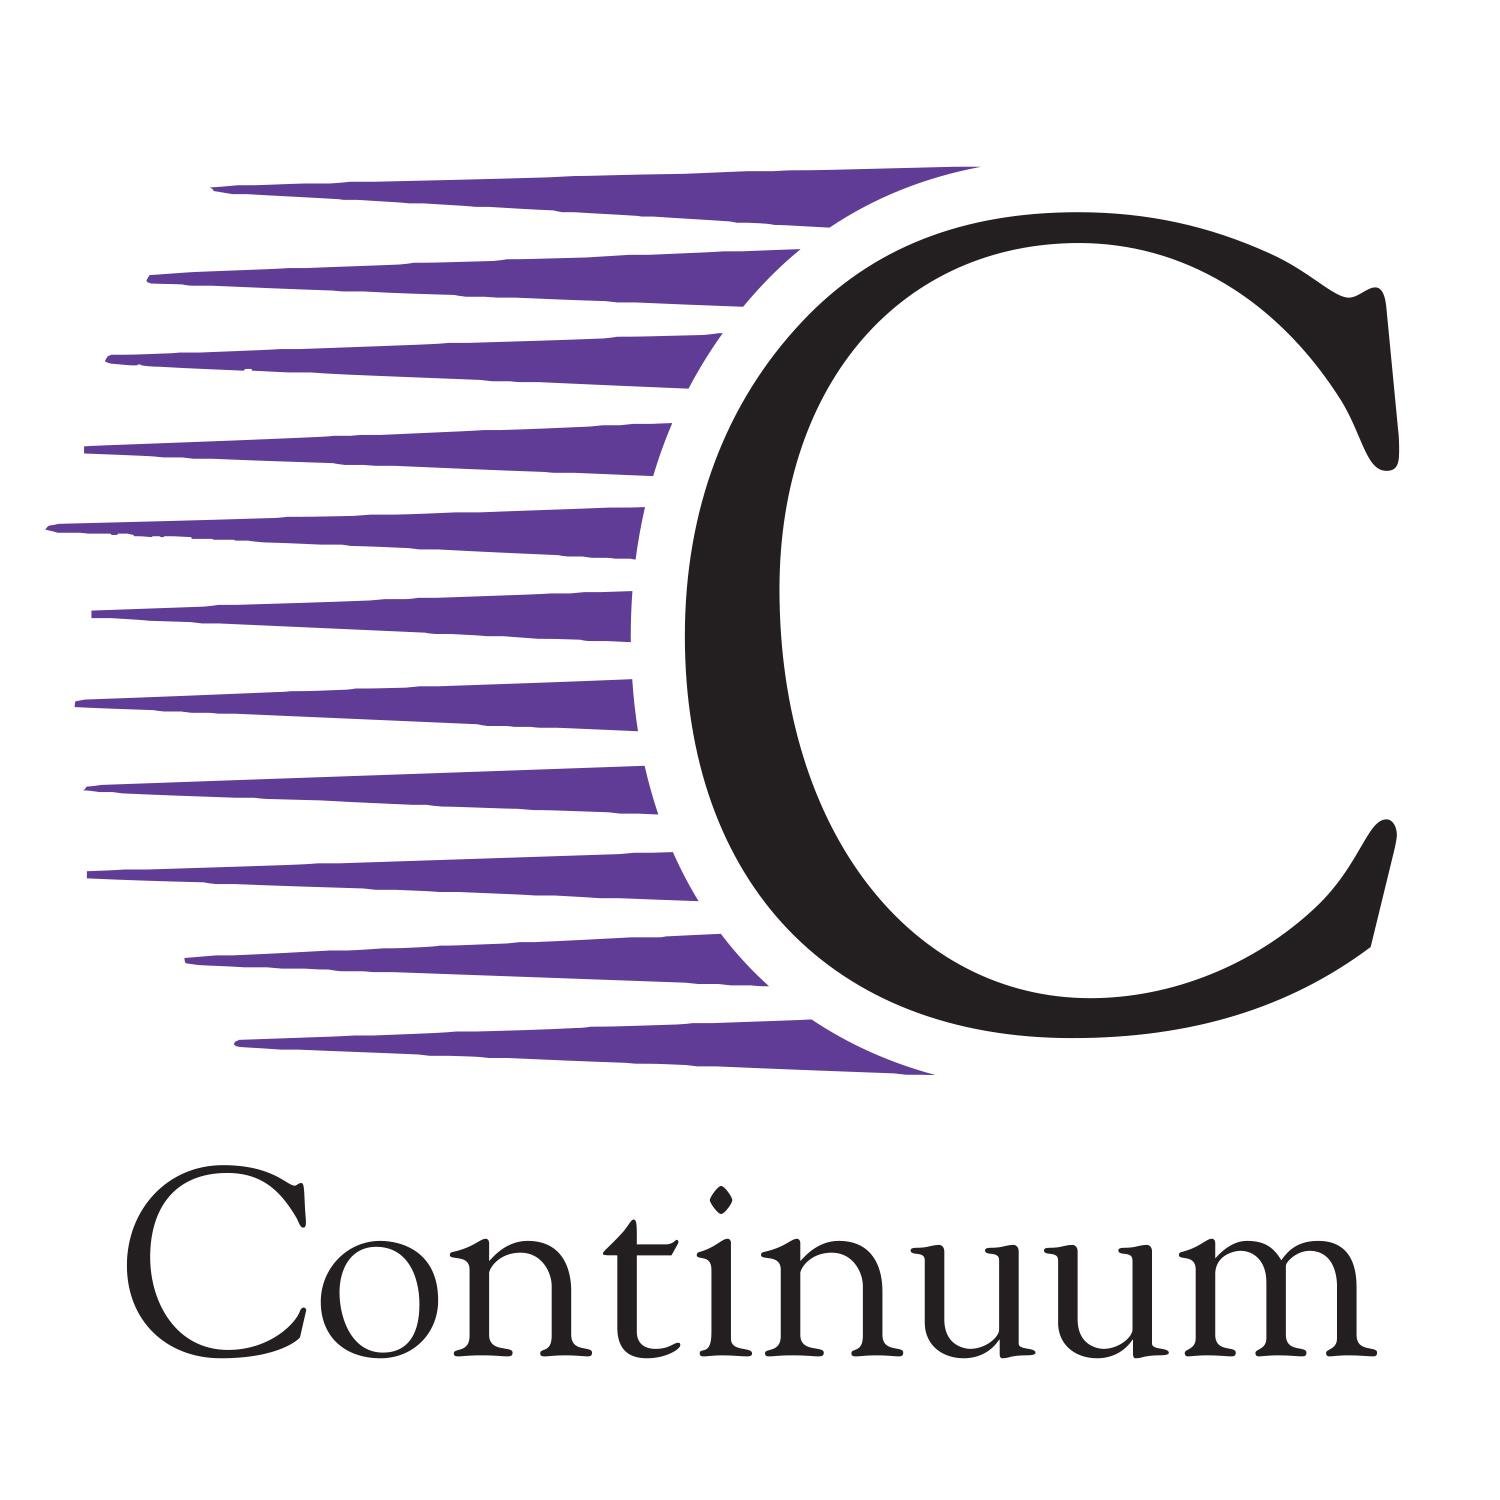 Continuum EAP services are provided to you and your family by your employer.